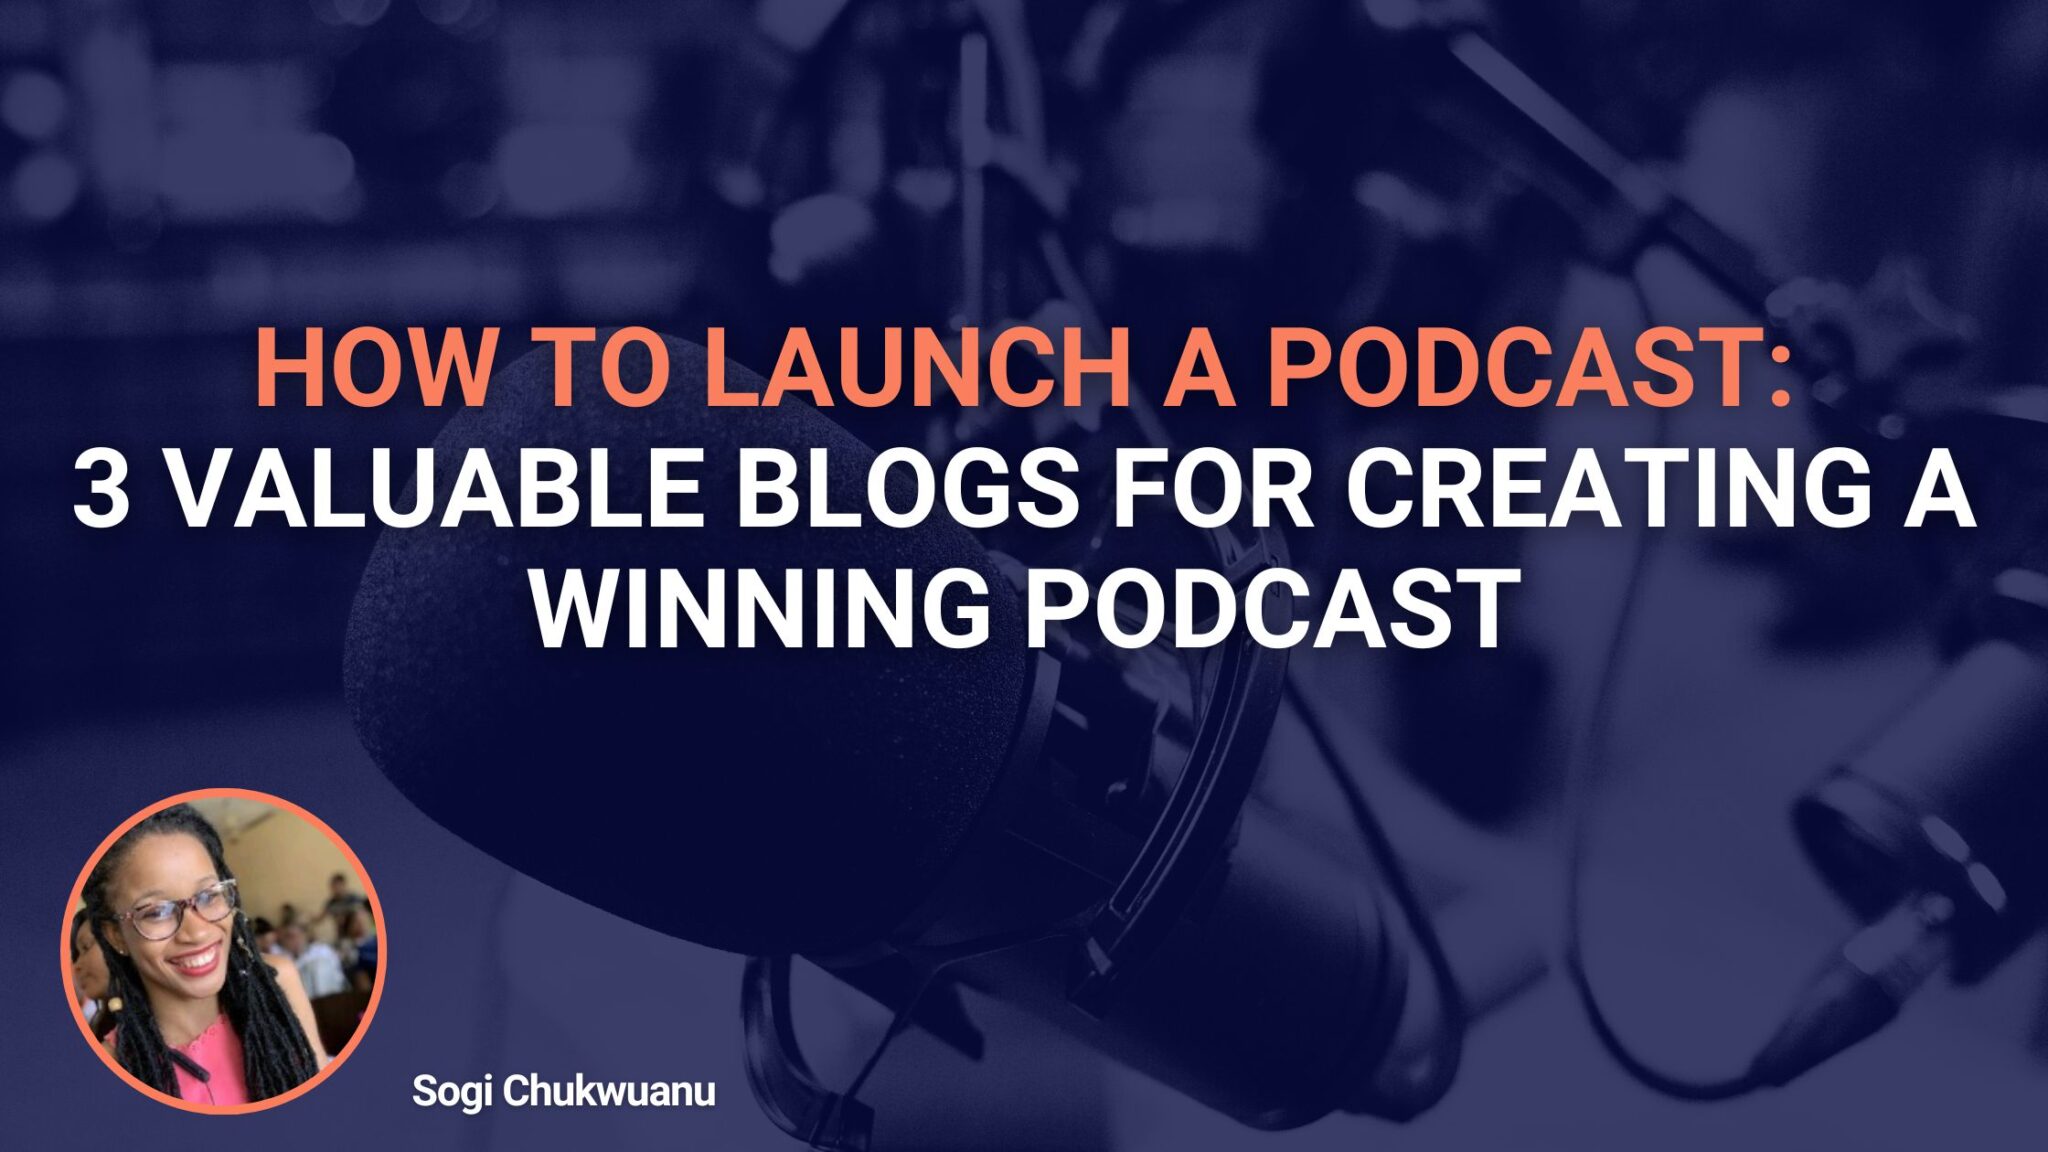 How To Launch A Podcast: 3 Valuable Blogs For Creating A Winning Podcast